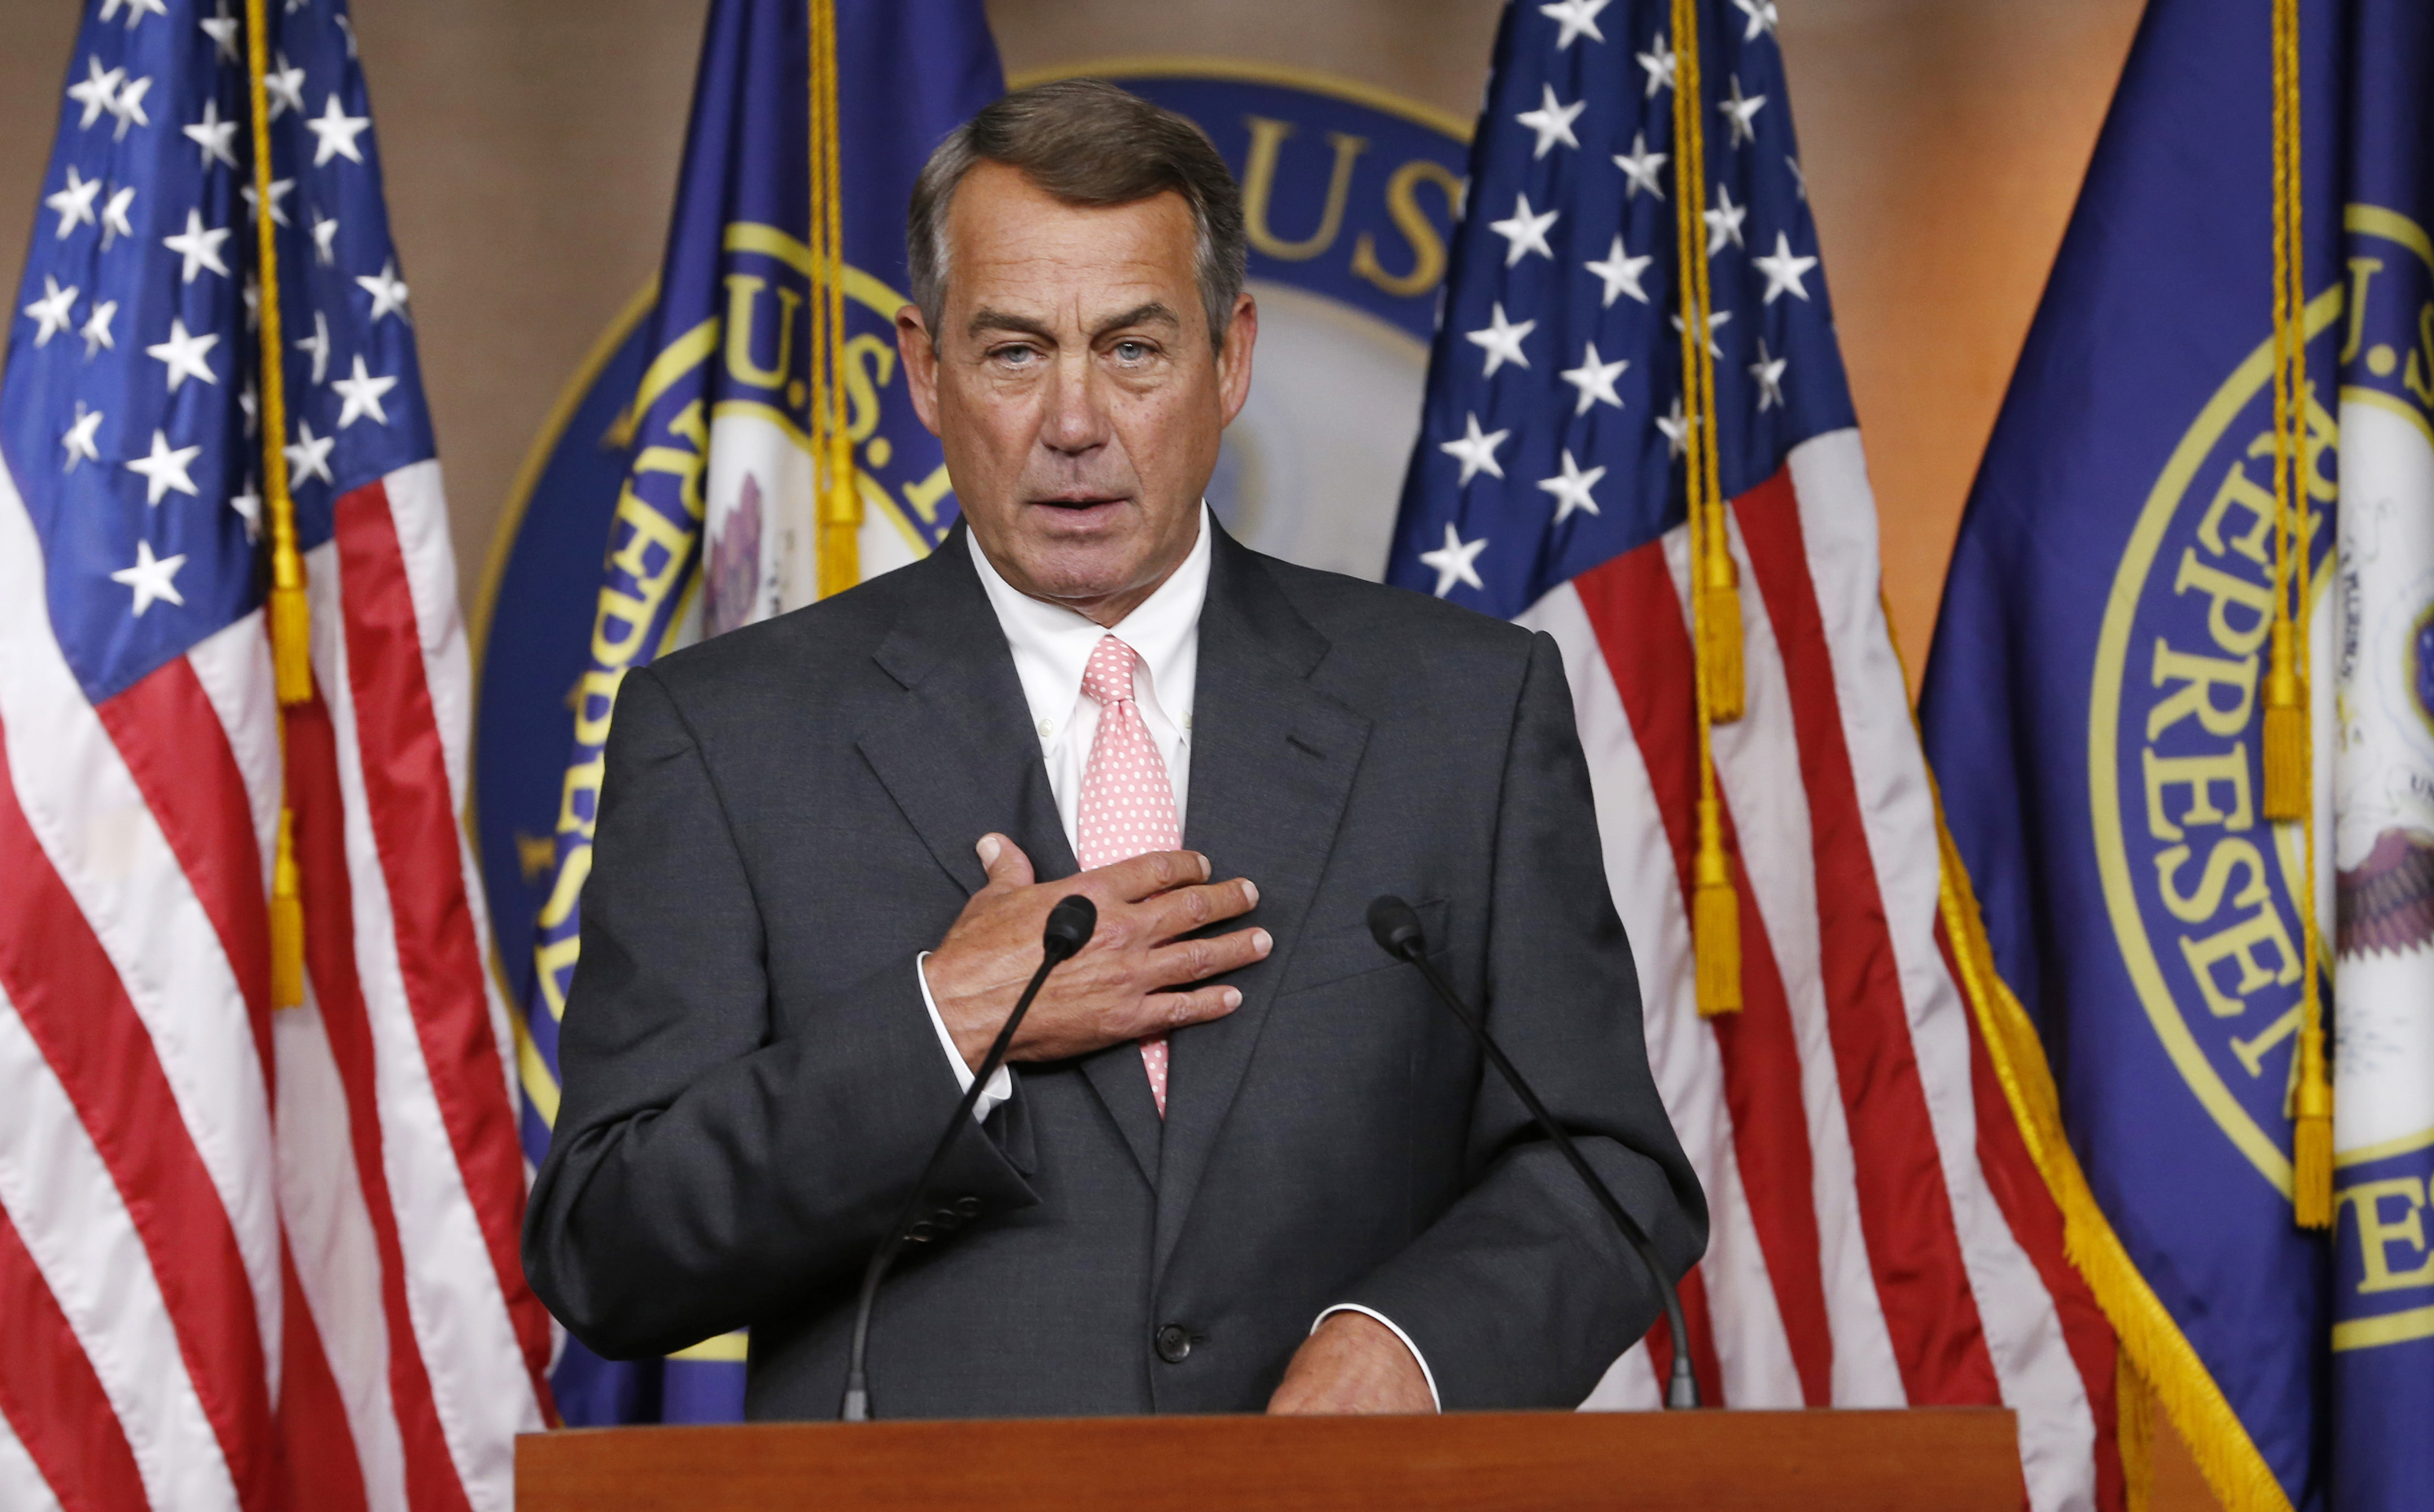 Just as US President Barack Obama was welcoming Xi Jinping to Washington, US House Speaker John Boehner (above) announced his resignation from Congress. Photo: AP

Major American bro